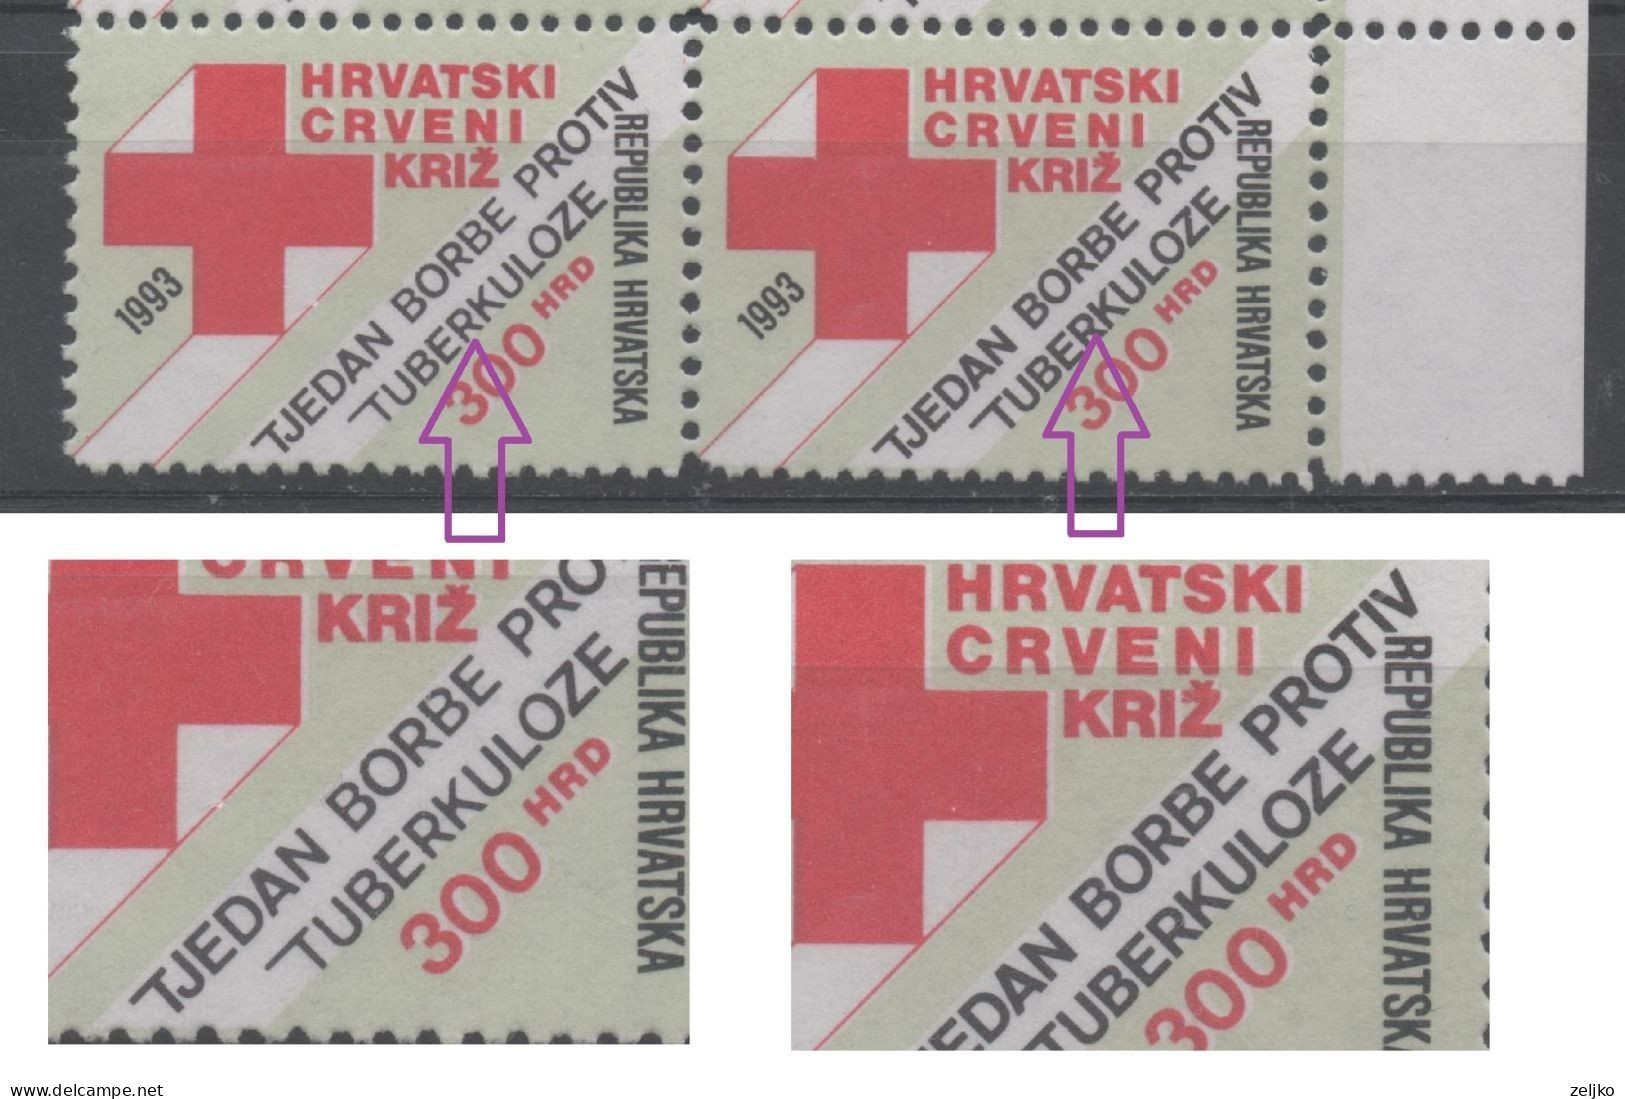 Croatia, Error, 1993, MNH, Michel 30, Difference In Thickness Of The Inscription, Red Cross - Kroatien